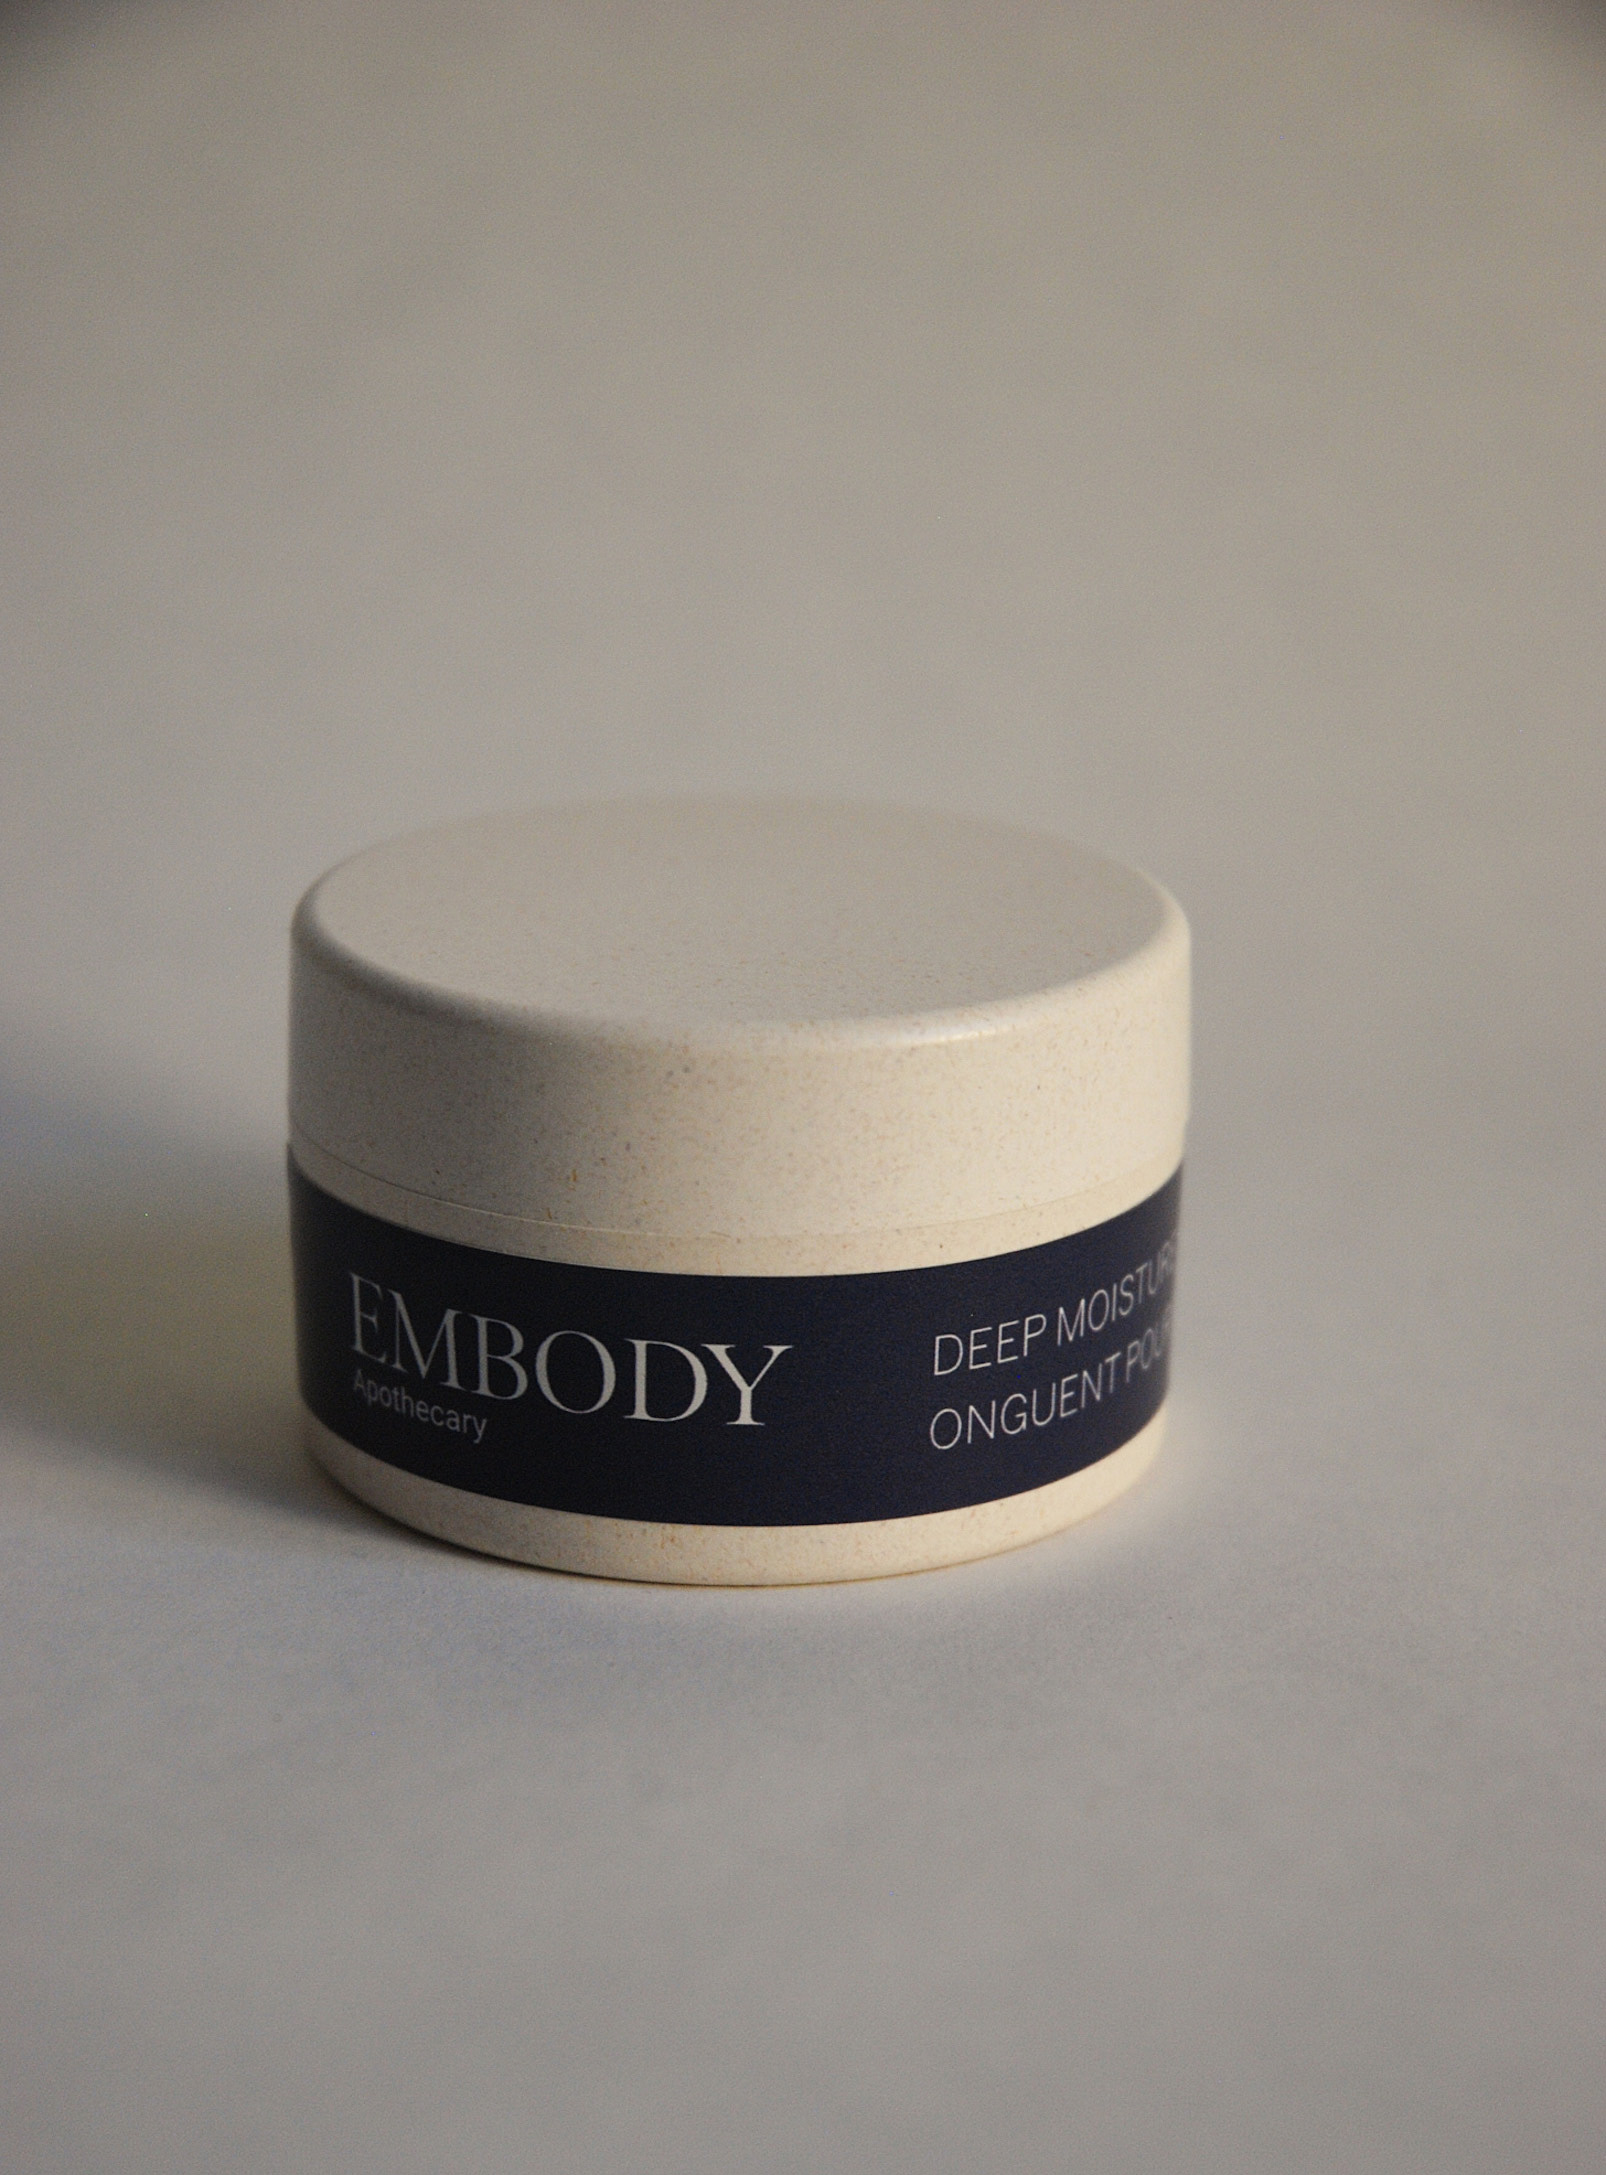 Embody Apothecary - L'onguent pour mains sèches